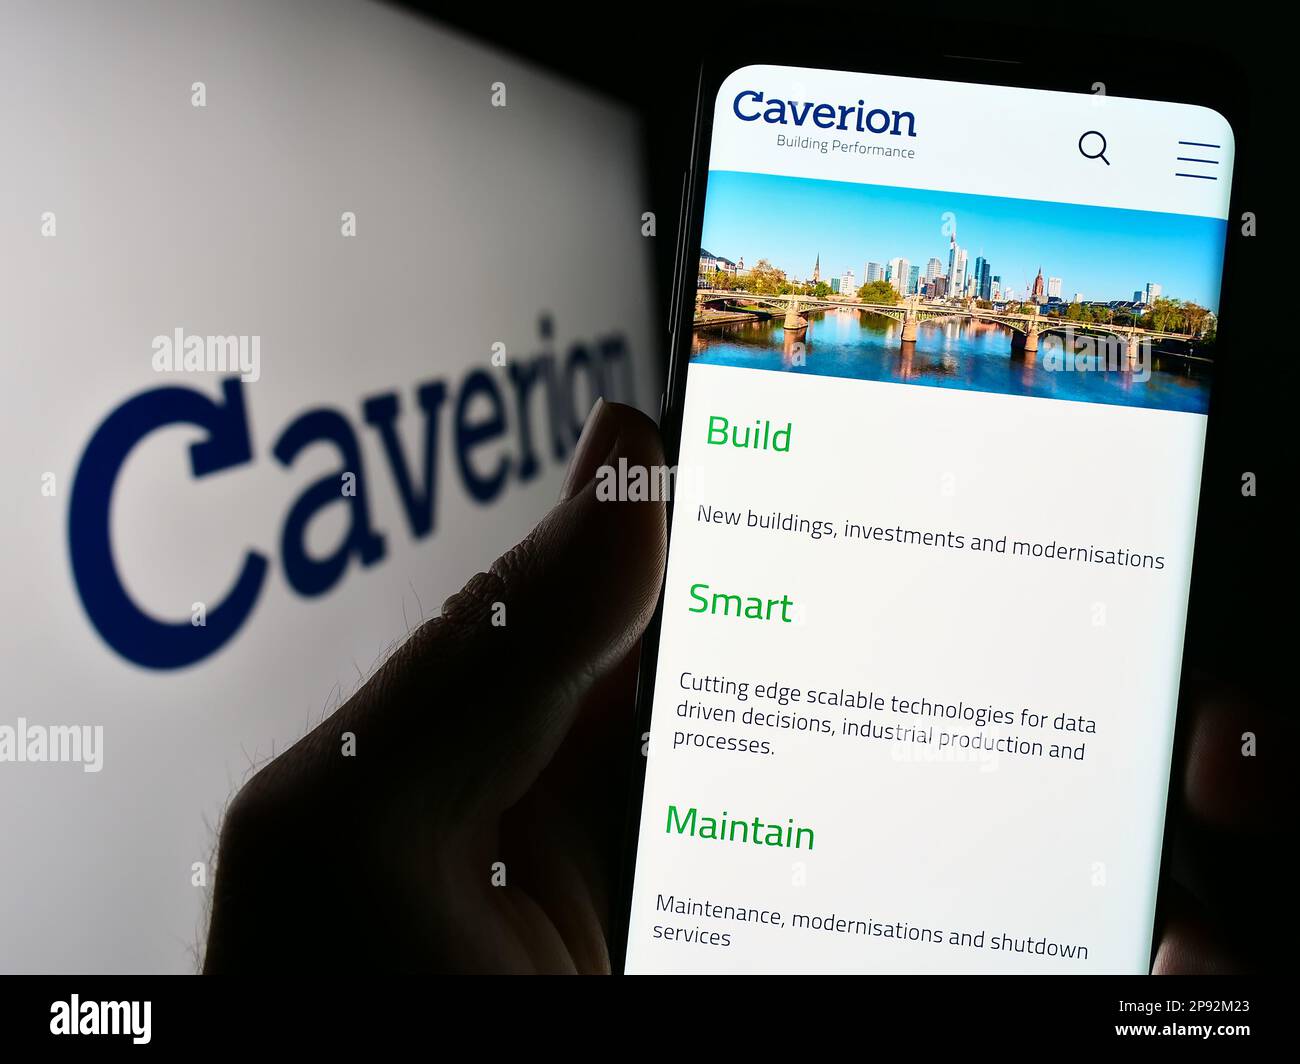 Person holding cellphone with website of building technology company Caverion Oyj on screen in front of logo. Focus on center of phone display. Stock Photo